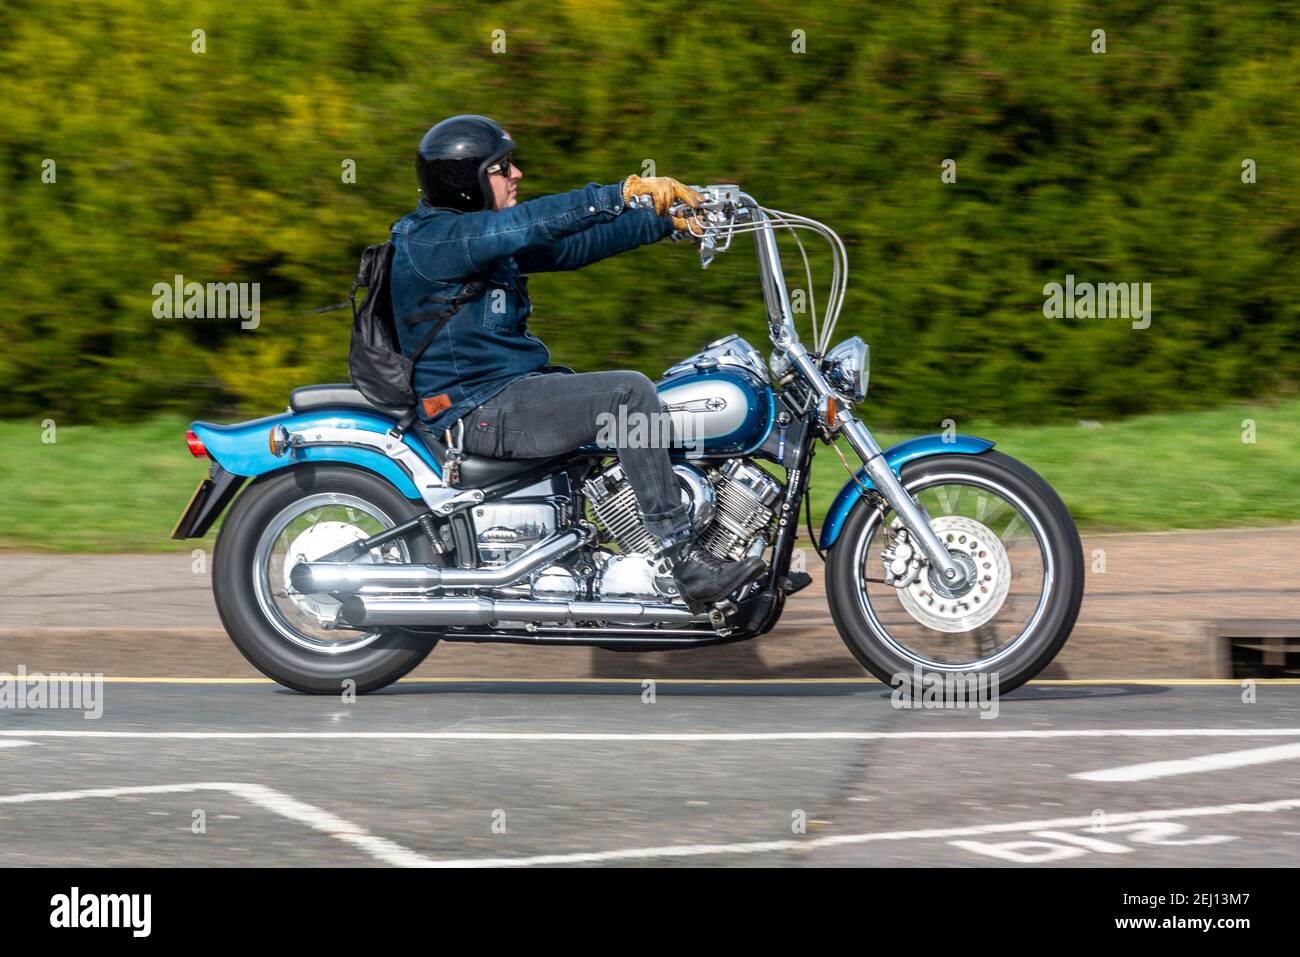 Yamaha DragStar motorcycle on Western Esplanade in Southend on Sea, Essex, UK. Rider wearing denim jacket and jeans trousers on cruiser motorbike Stock Photo